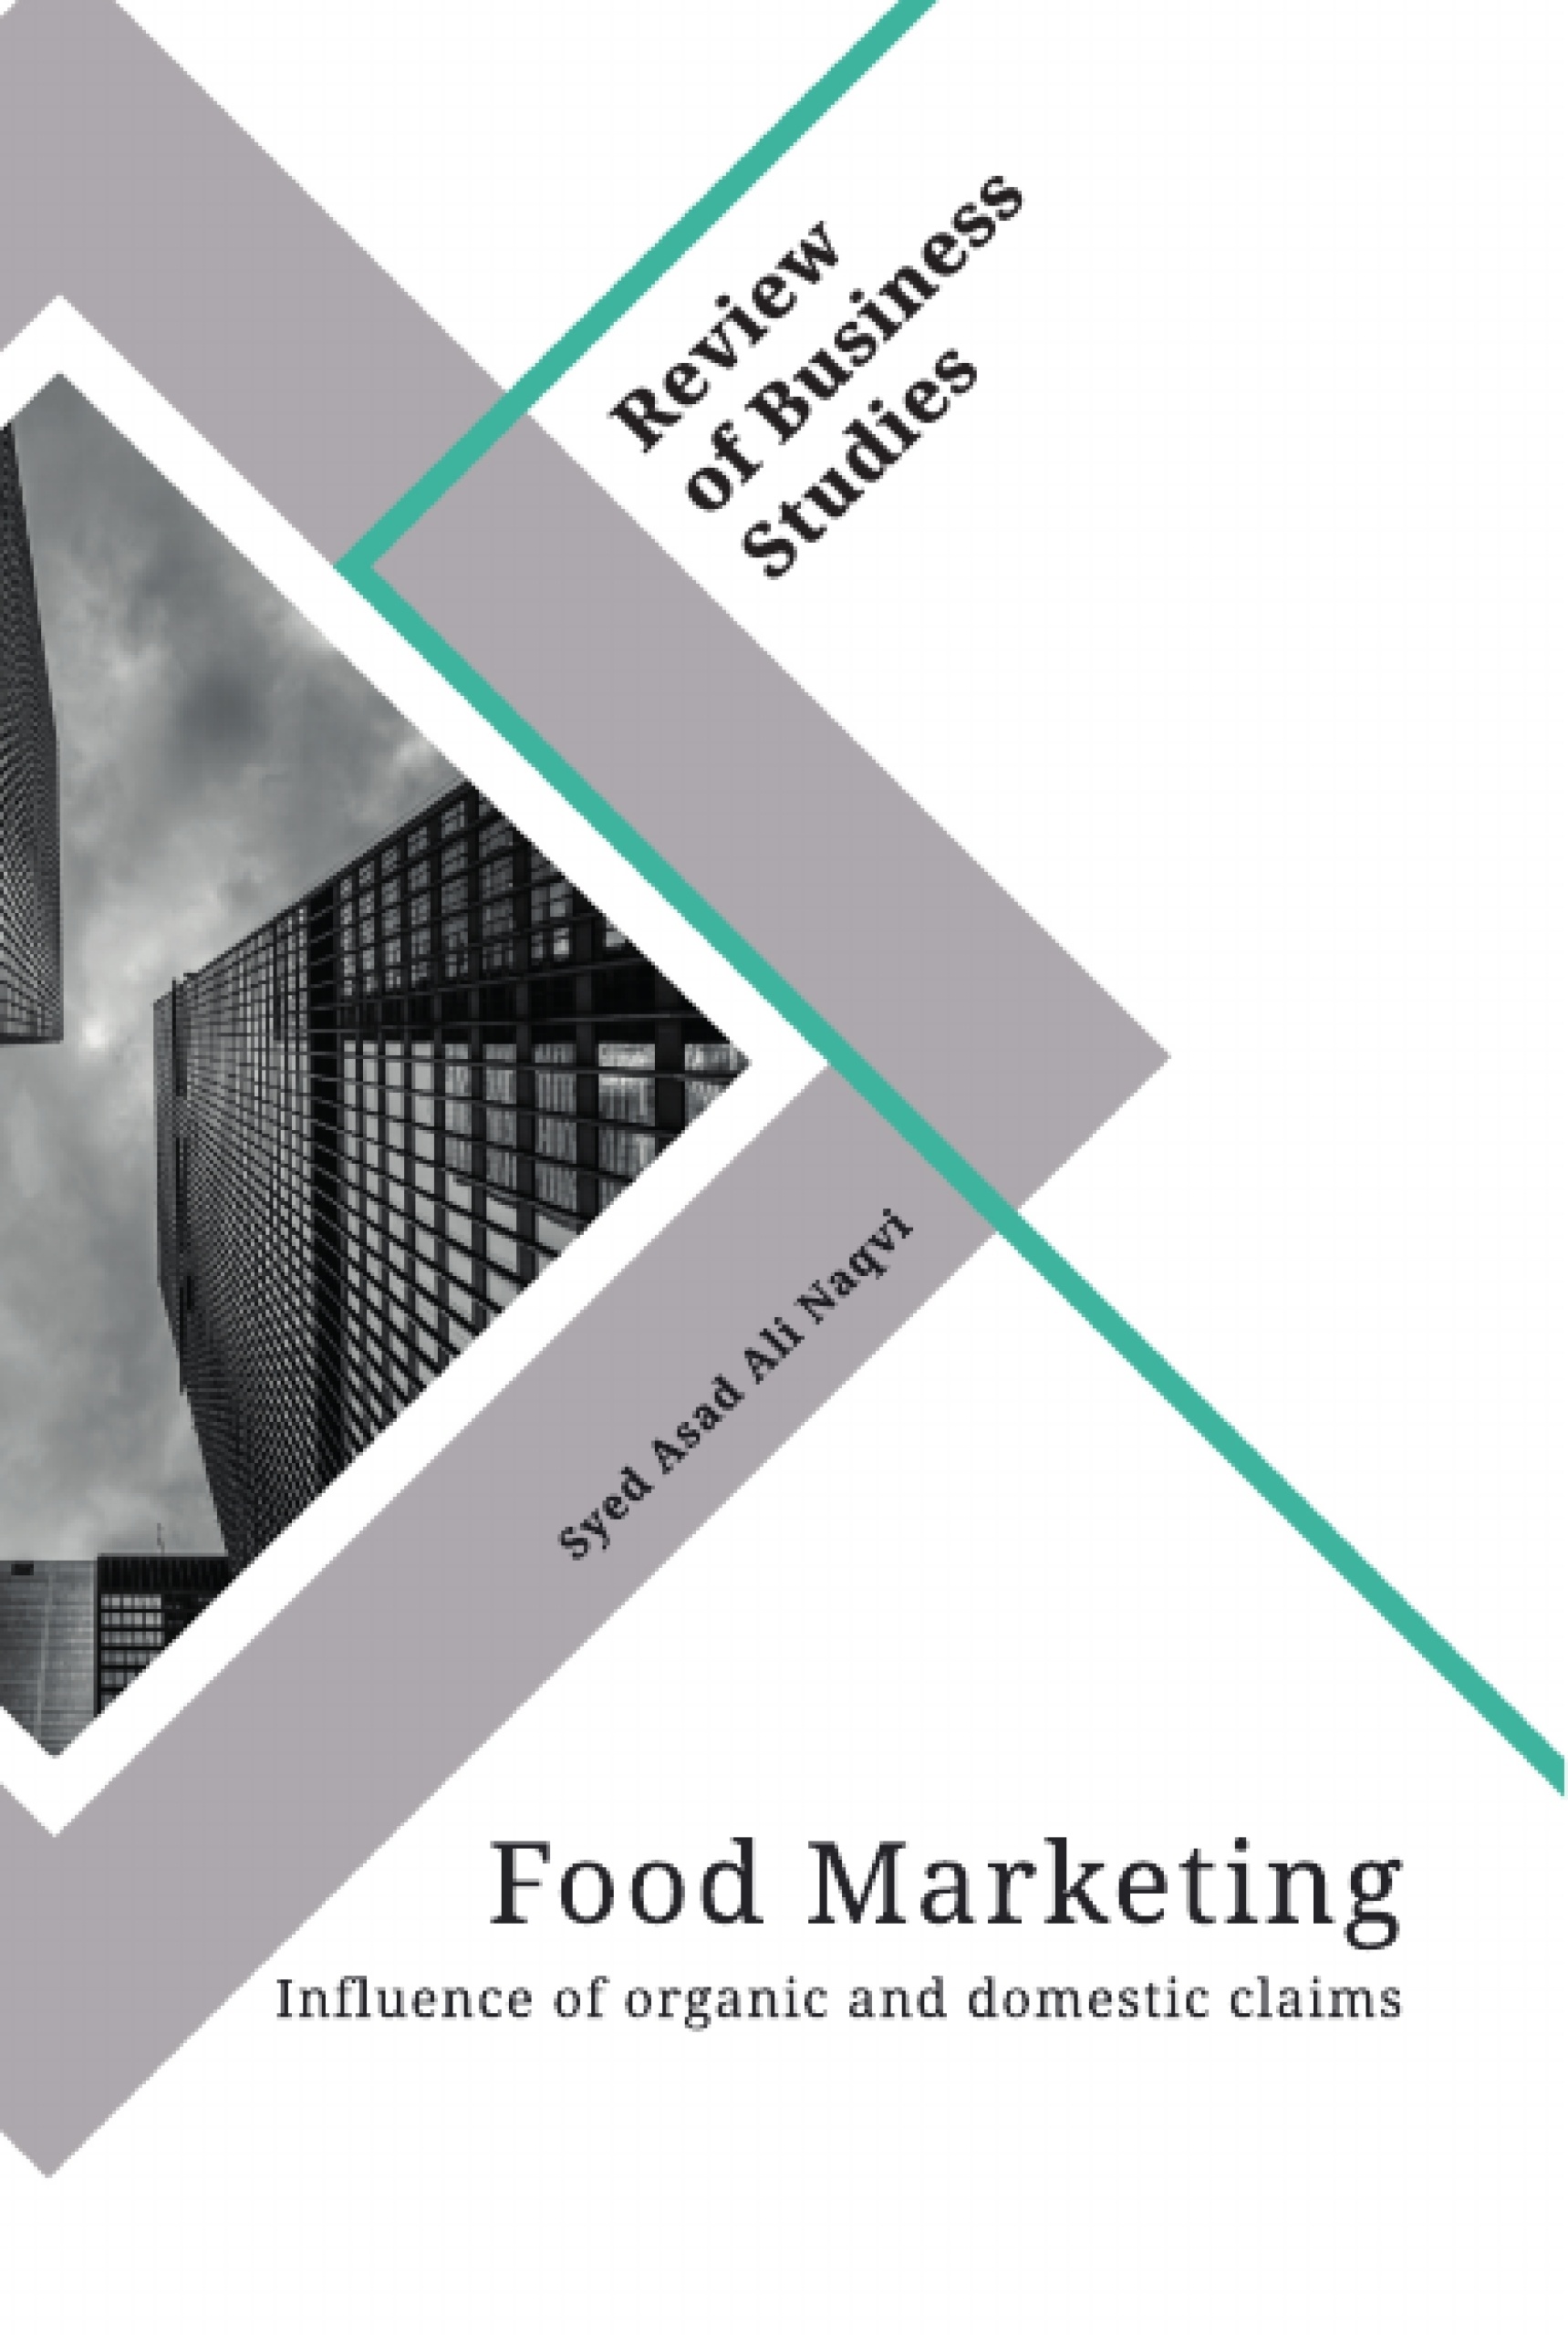 Title: Food Marketing. Influence of organic and domestic claims